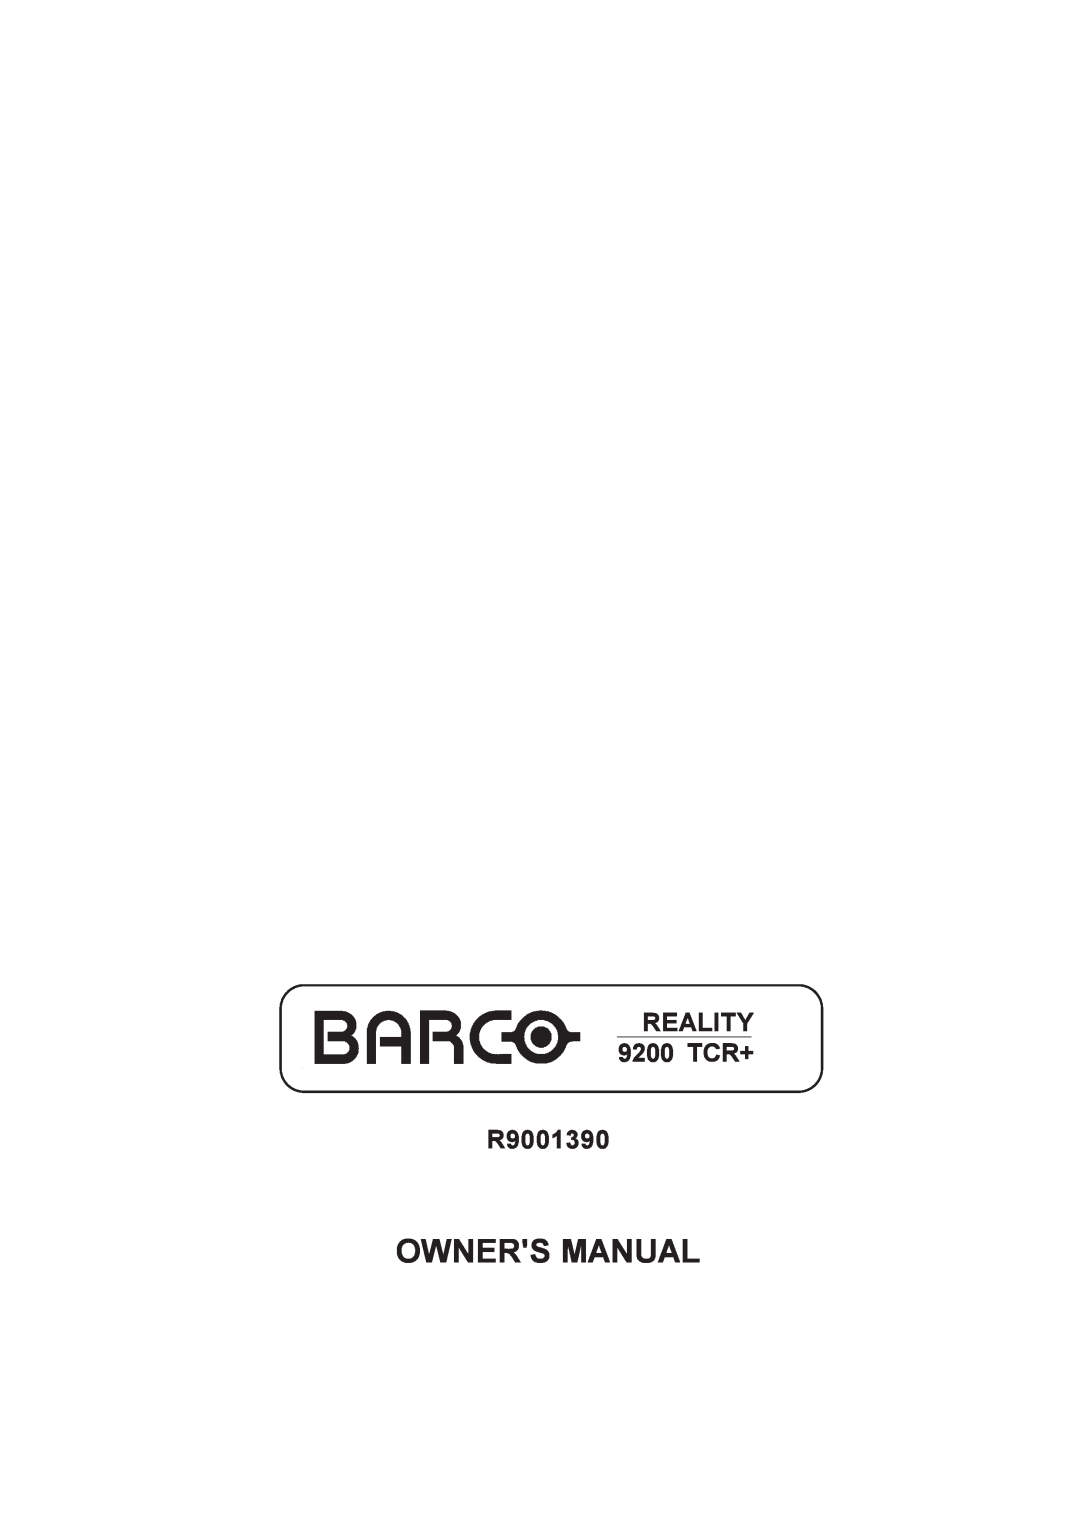 Barco manual Owners Manual, REALITY 9200 TCR+ R9001390 